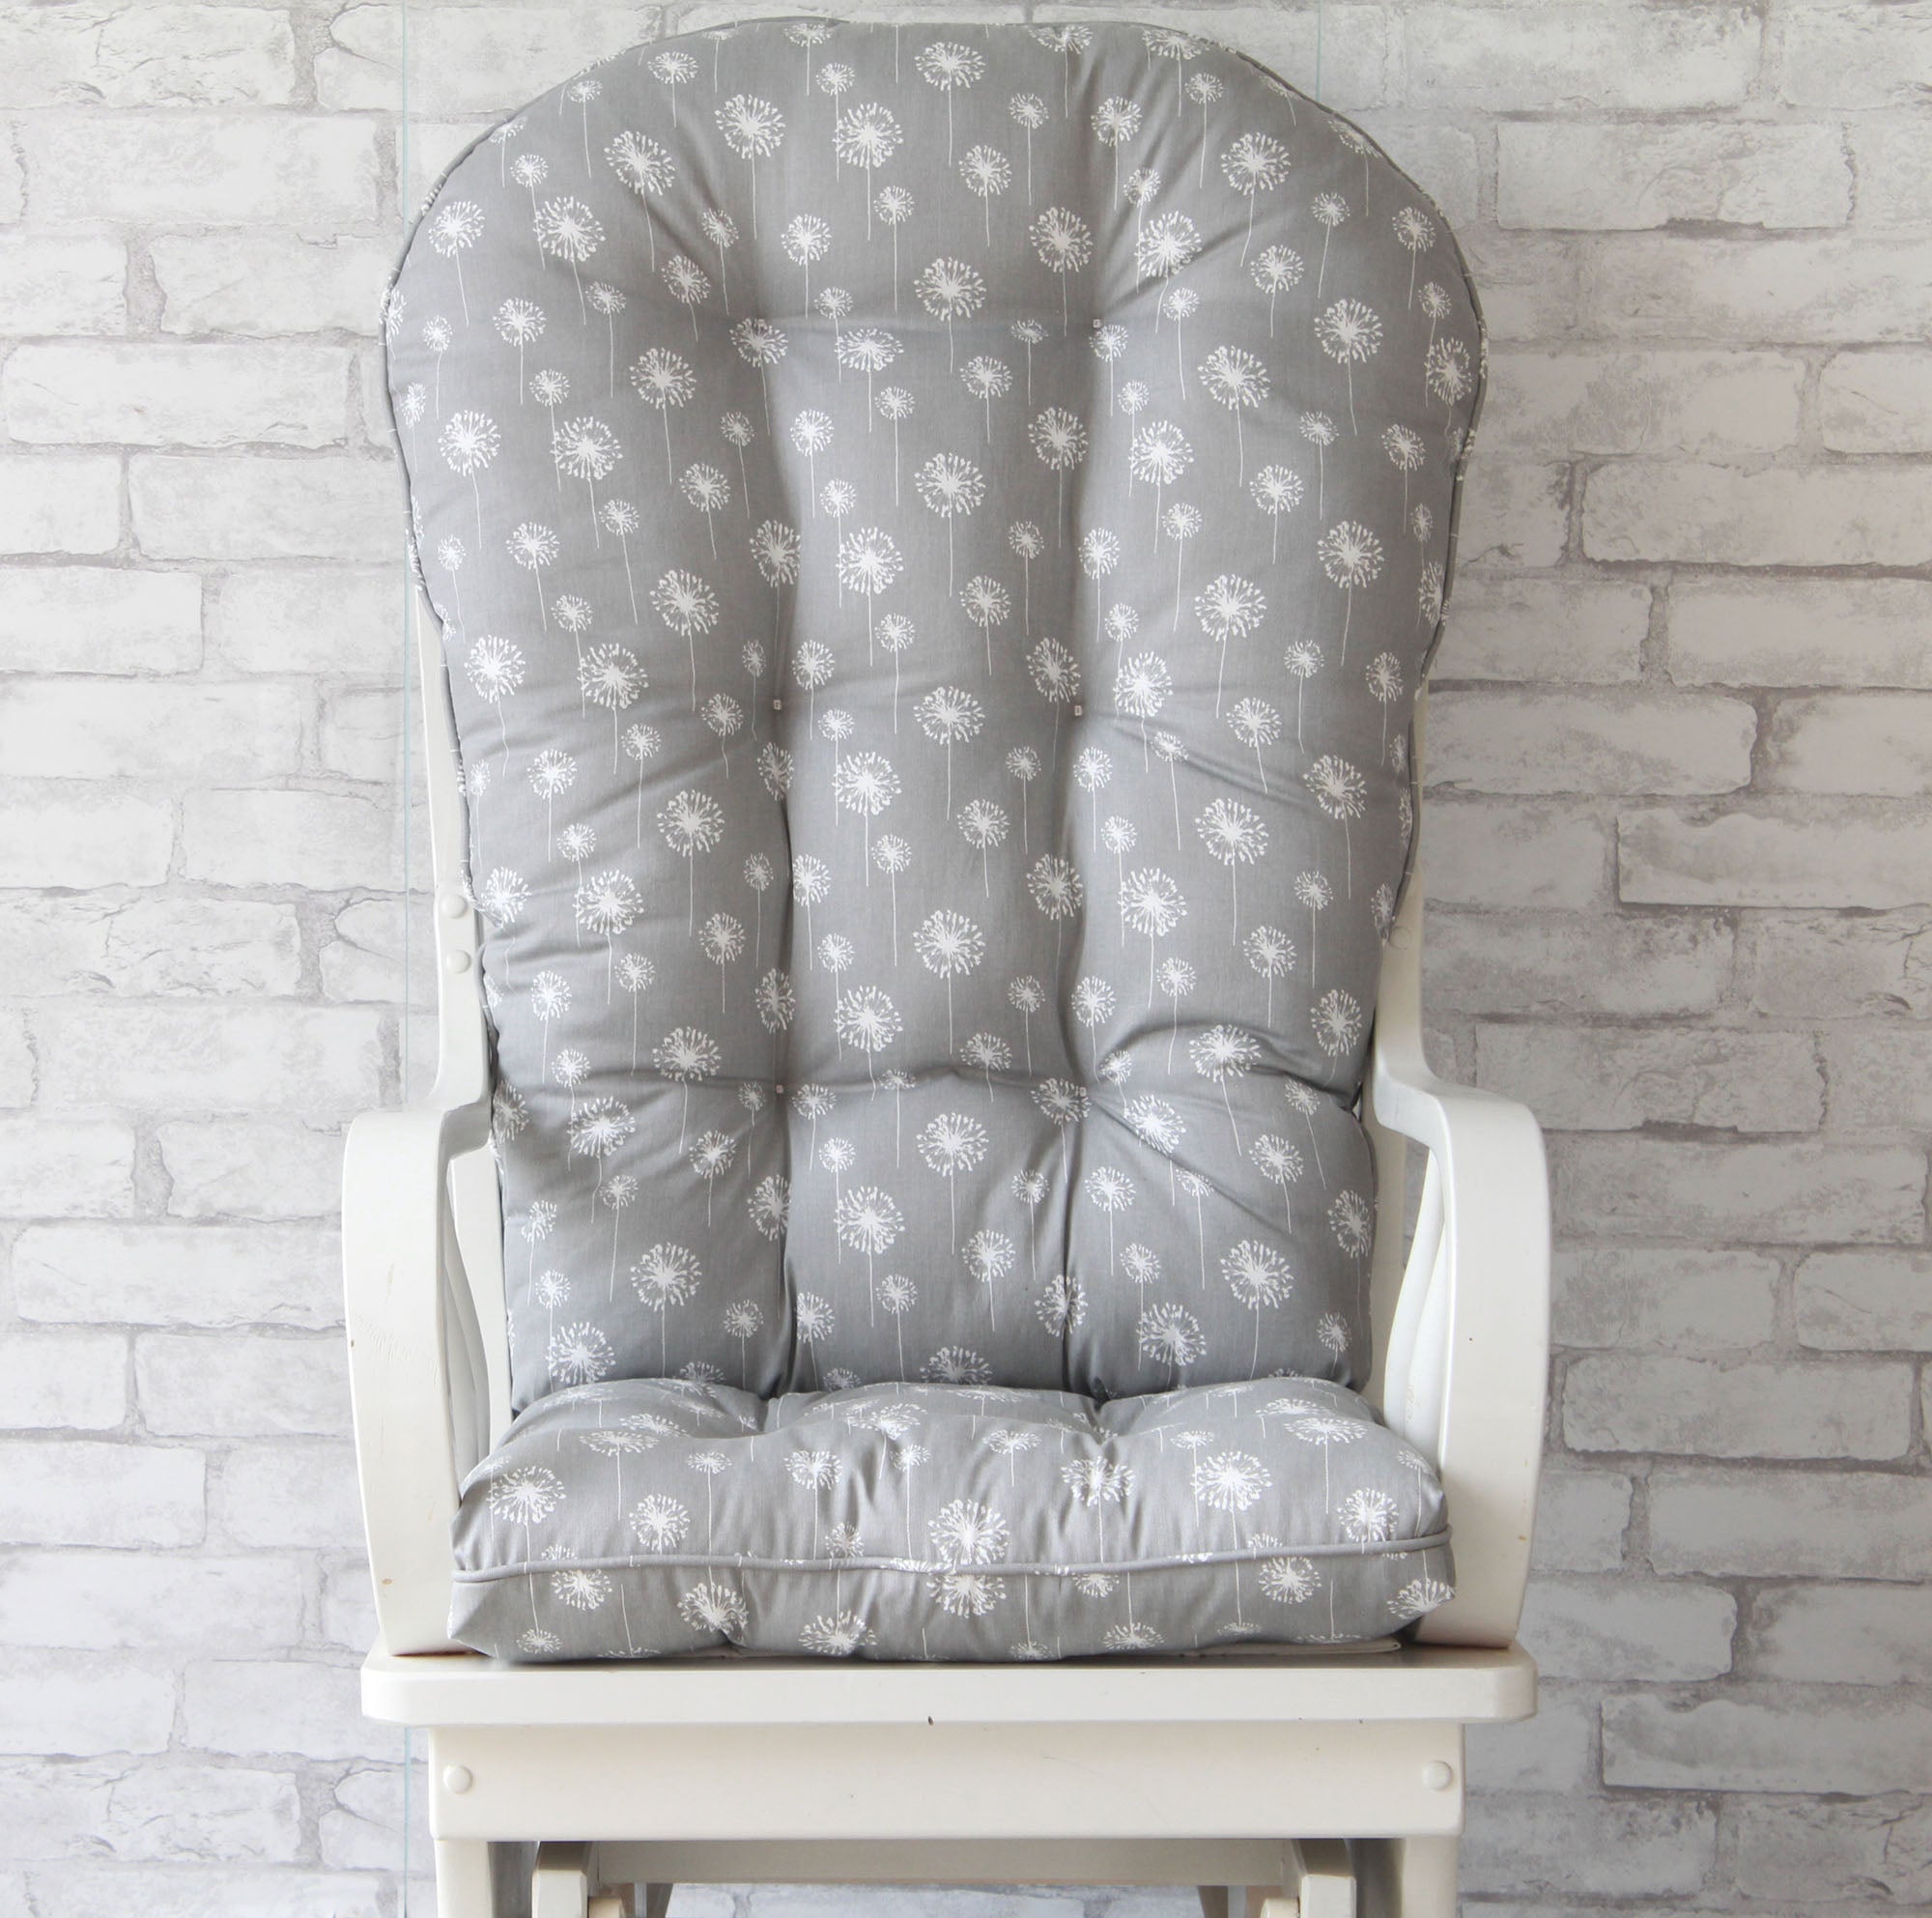 glider rocker replacement cushions made with gray upholstery fabric with white dandelions